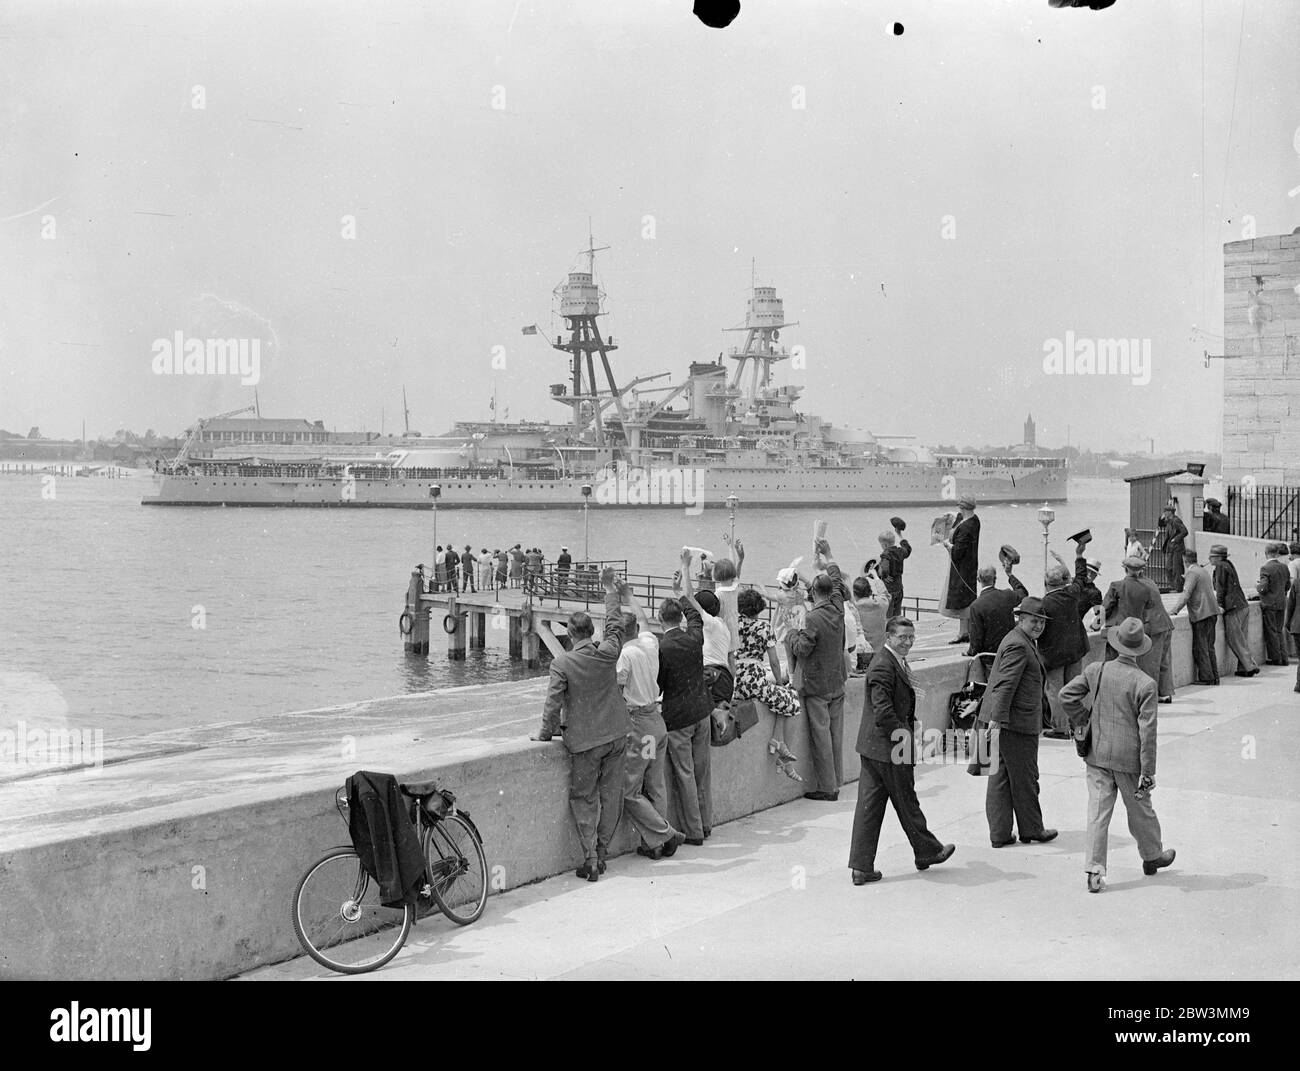 American battleship arrives at Portsmouth for a visit . The USS Oklahoma ( BB - 37 ) arrived at Porstmouth for a visit . The Oklahoma is usedas a training ship for mid shhipmen of the Naval Academy . She was in the division commanded by Rear Admiral T S Rodgers which during the war was sent to Berehaven as an additional guard for the American troop convoys in the Atlantic . Two other battleships , the USS Arkansas ( BB-33 ) and the USS Wyoming ( BB-32 ) , which also served in British waters during the war , are to visit Portsmouth as well . Both are now employed as training ships . Photo shows Stock Photo